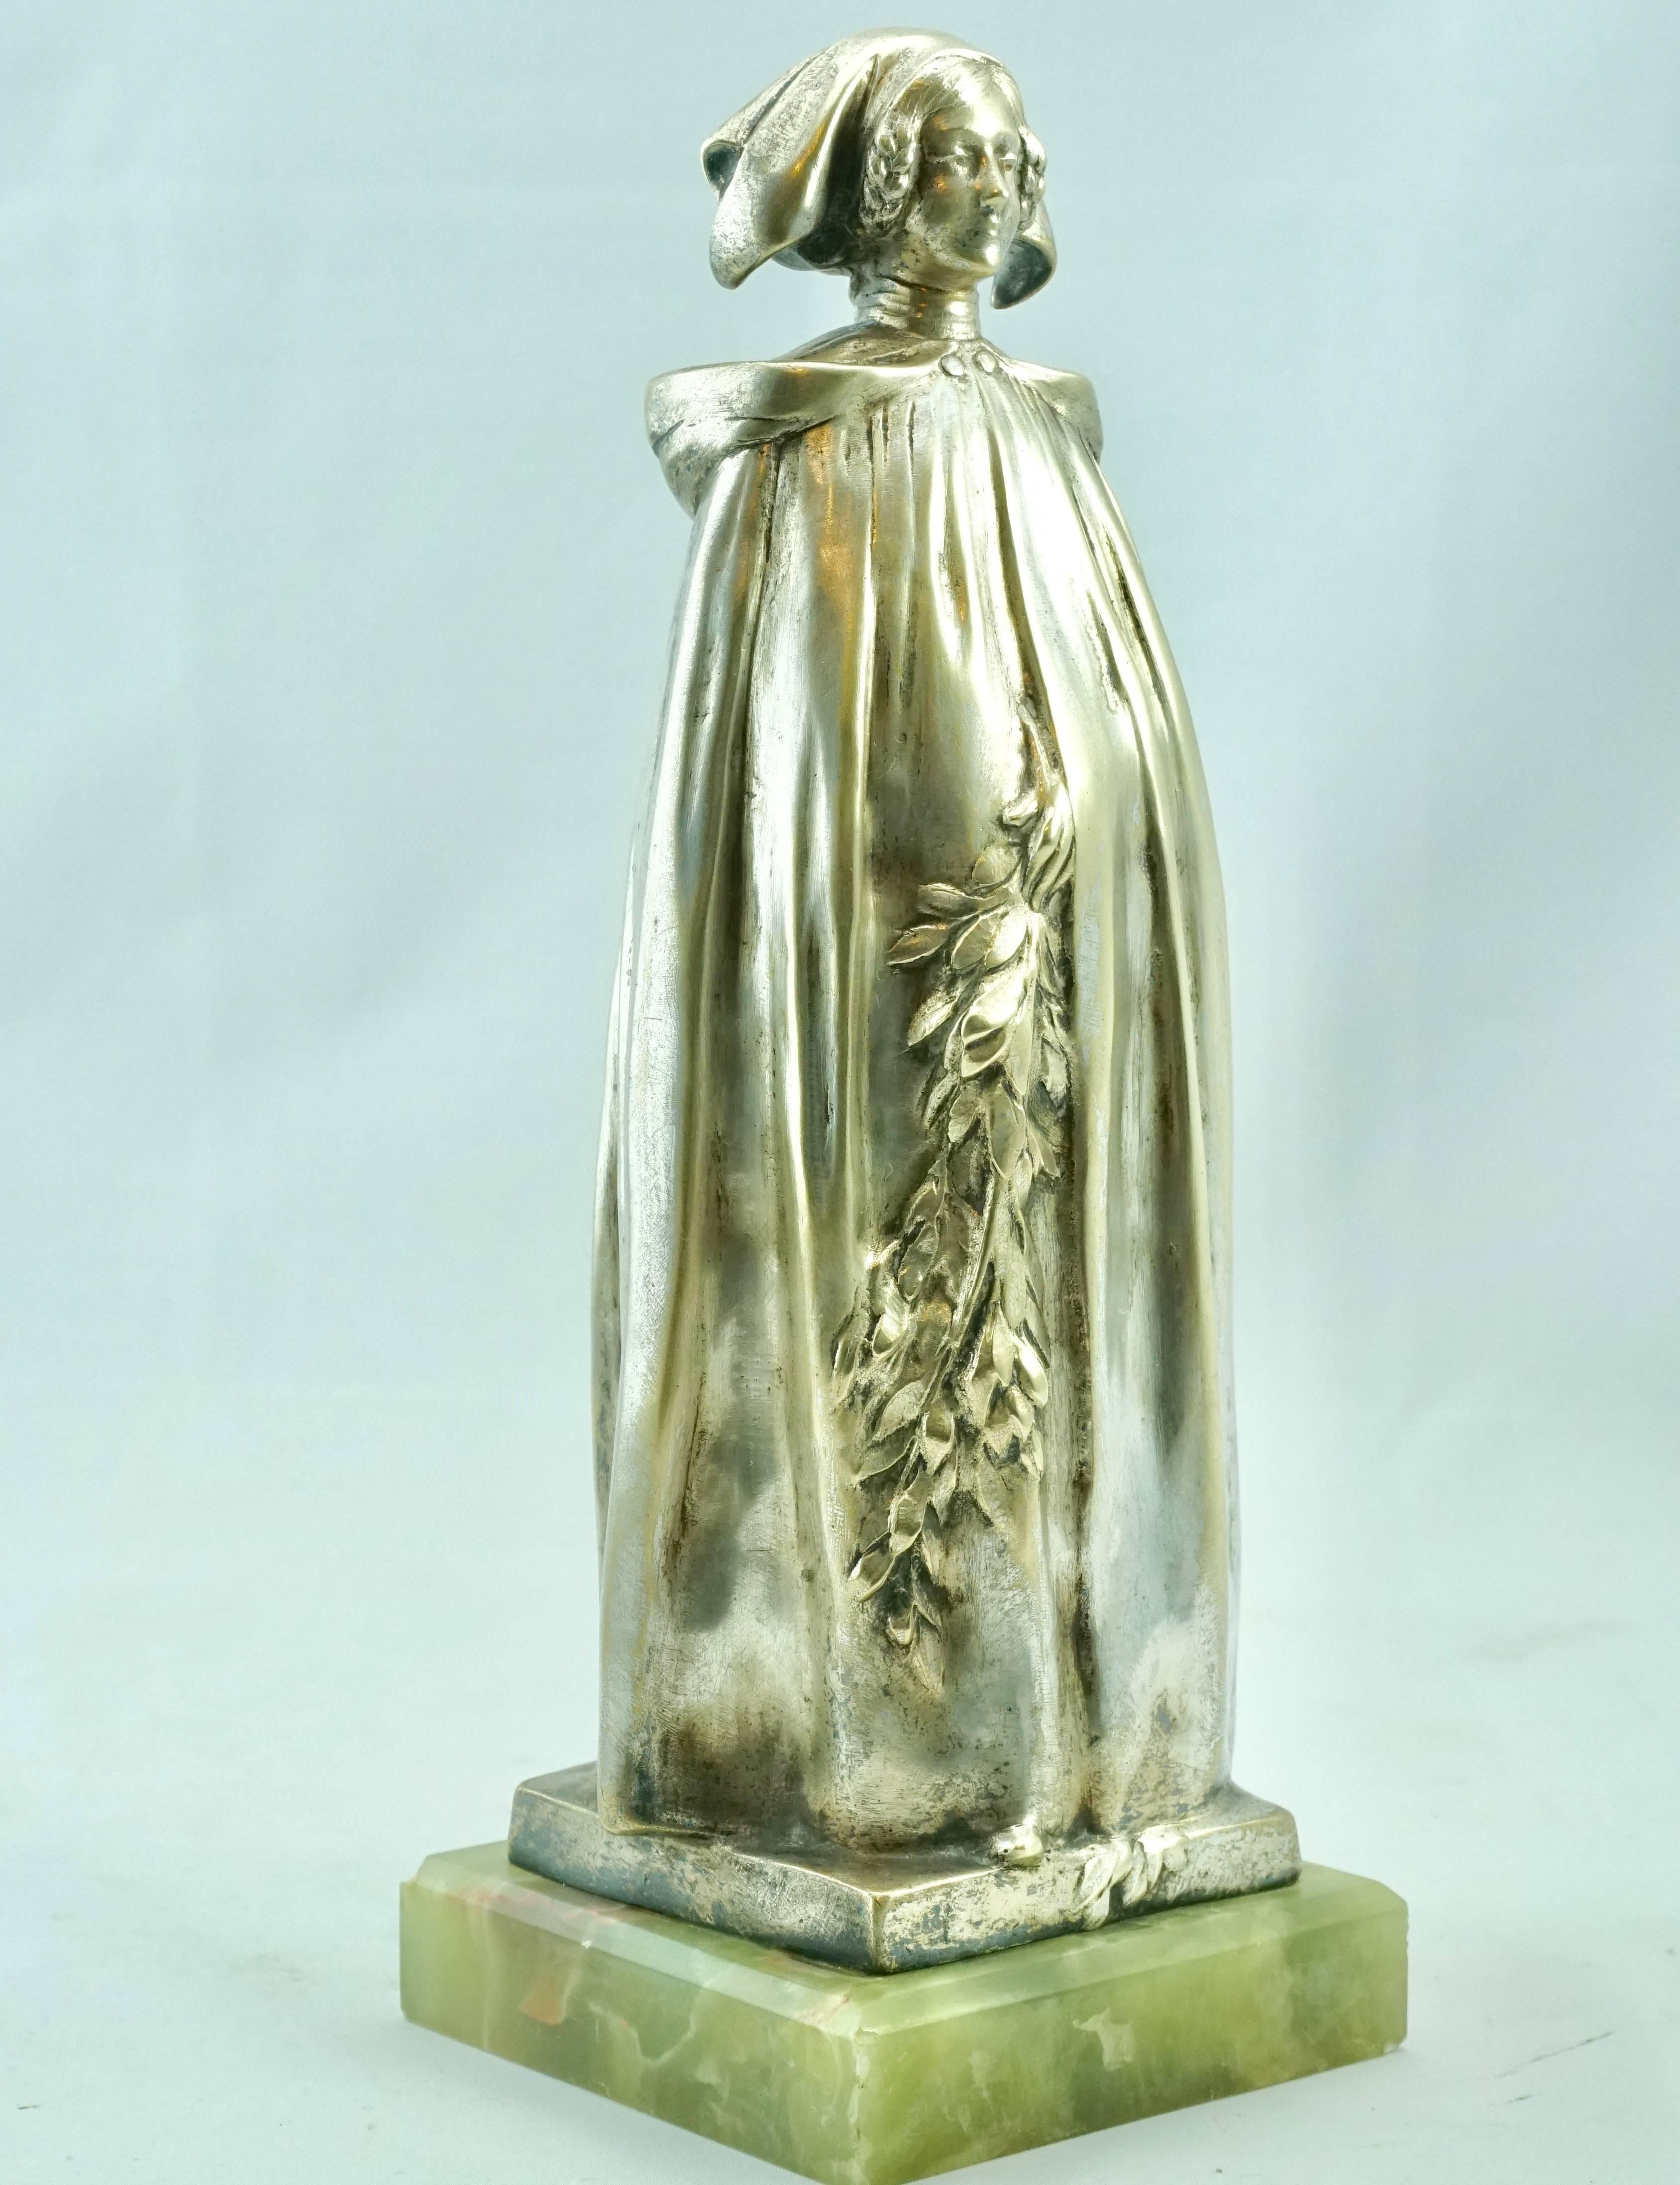 L'alsacienne Or Bretonne aux Rameau silver overlay patina by Leo Laporte Blairsy (French, 1867-1923). Depicting a woman in robe holding a garnet of flowers with a L'alsacienne or Bretonne bonnet hat. Bronze on original onyx stone base.

Measure: